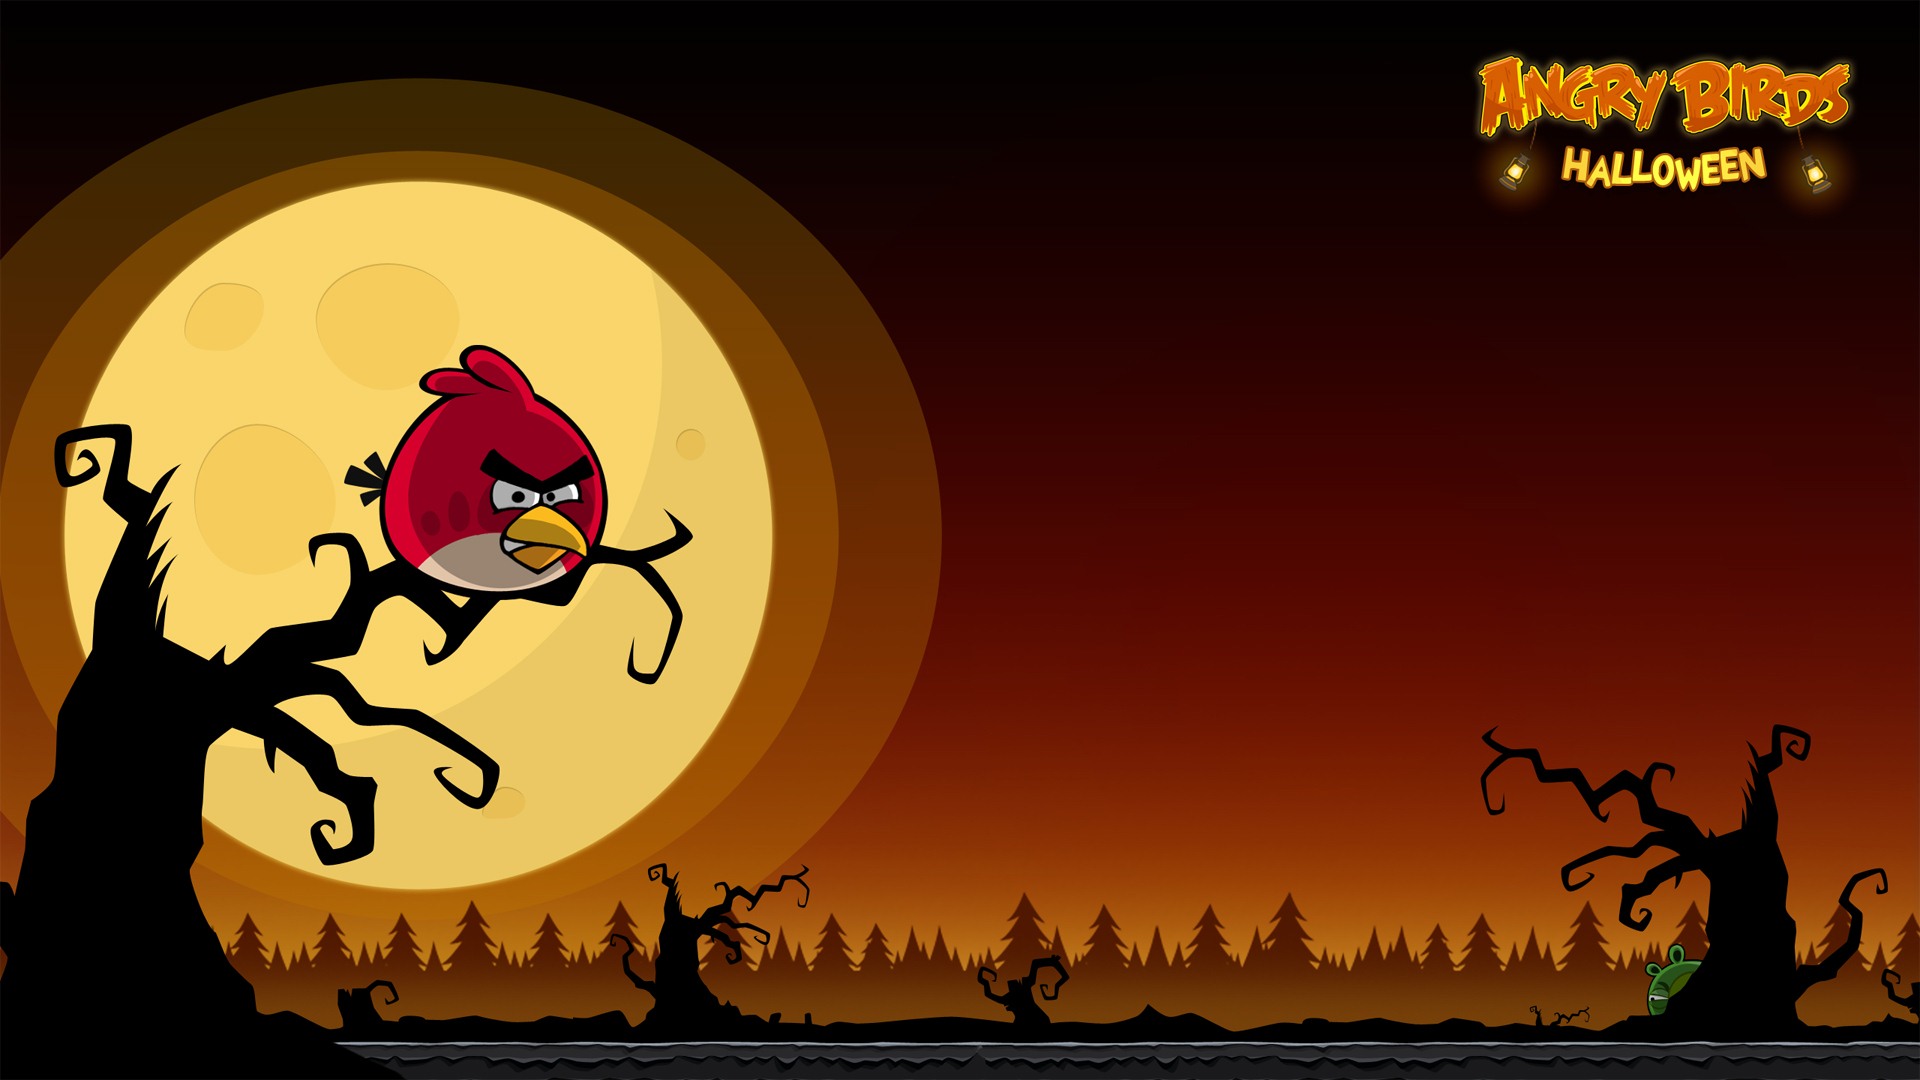 Angry Birds Game Wallpapers #26 - 1920x1080